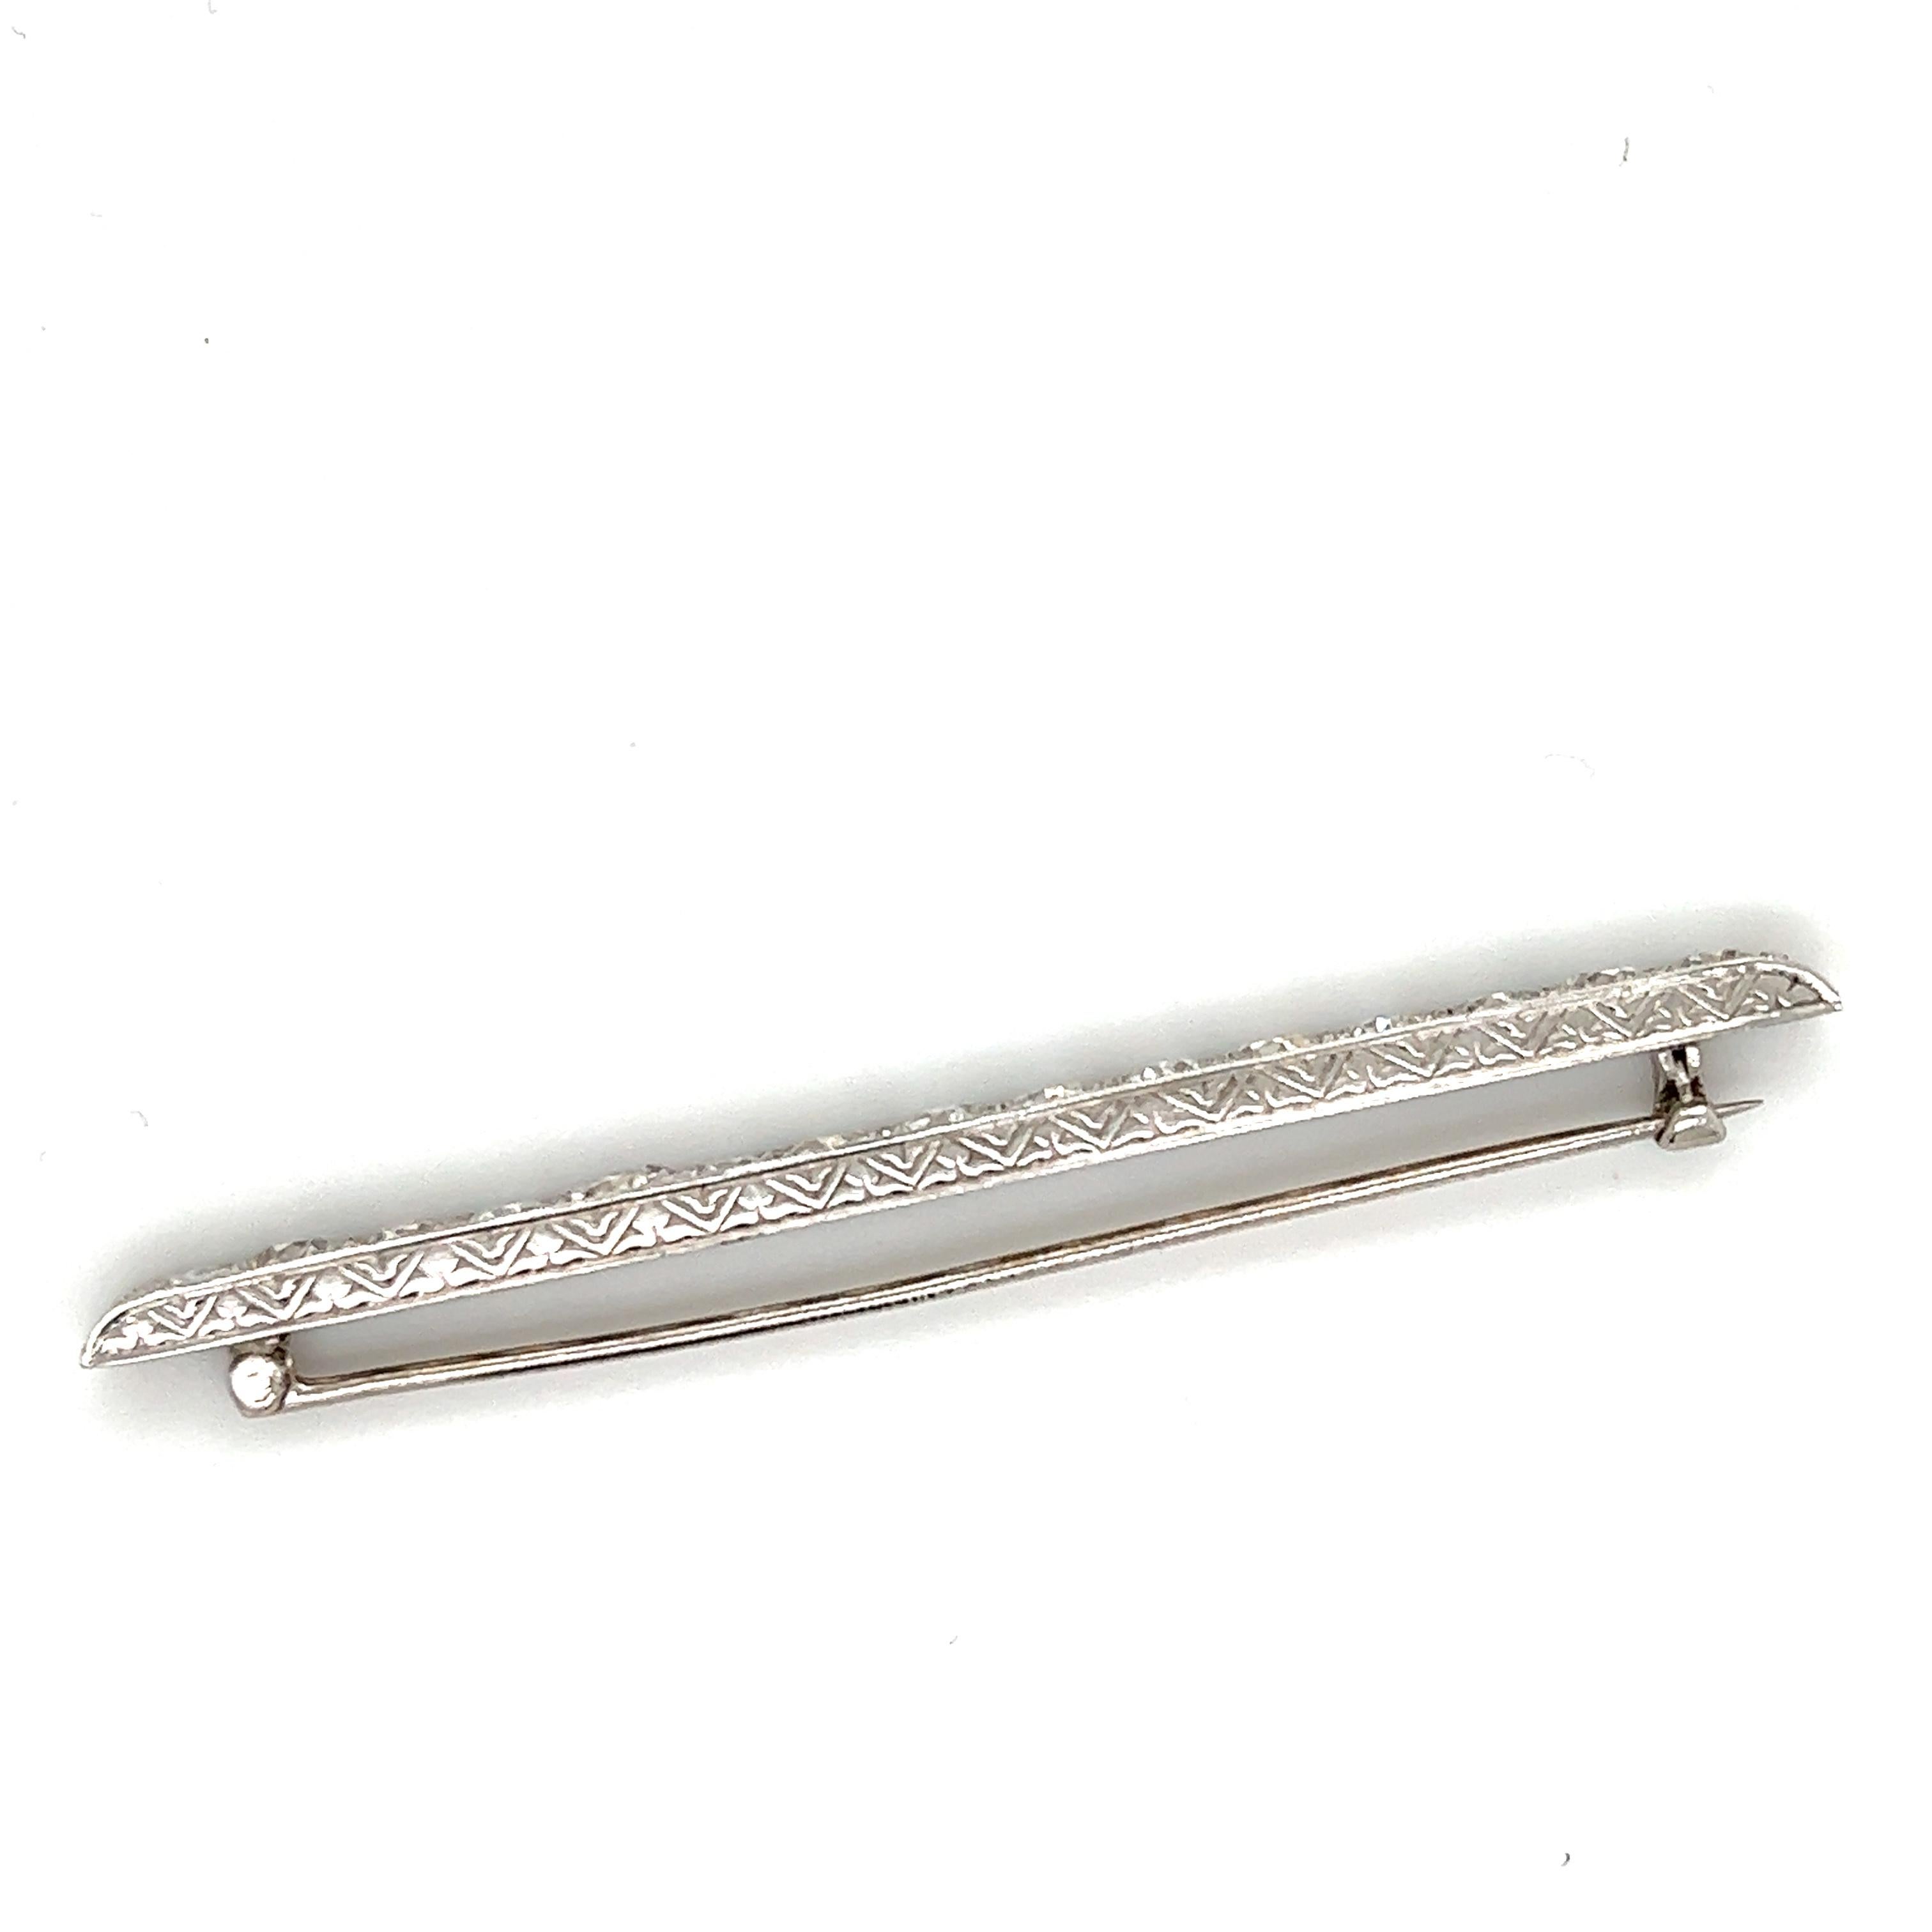 Gorgeous creation from the Art Deco time period. The pin is crafted in platinum with filagree details decorating the piece. The pin shows sharp angles as the pin is set with over 4.50 carats of natural old mine cut diamonds. The diamonds in the